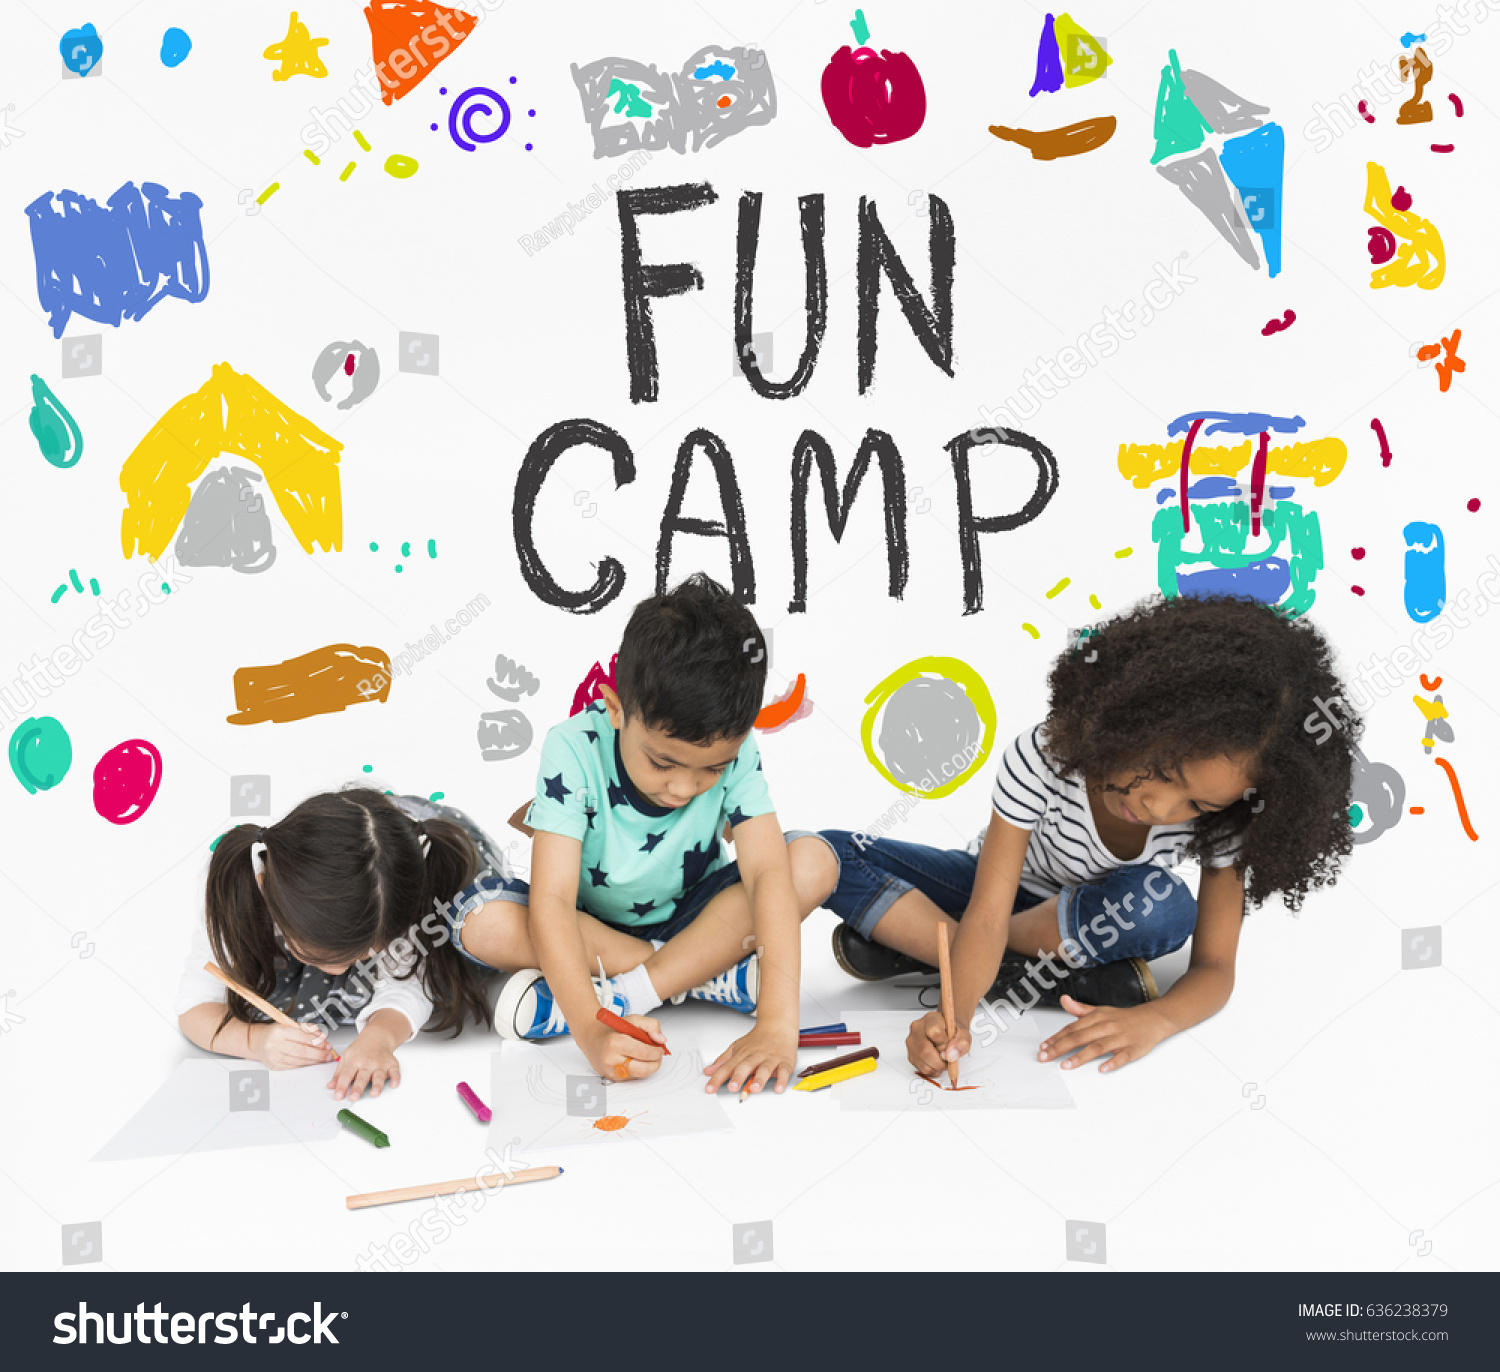 Kids Fun Camp Education Space Icons Stock Photo Edit Now 636238379